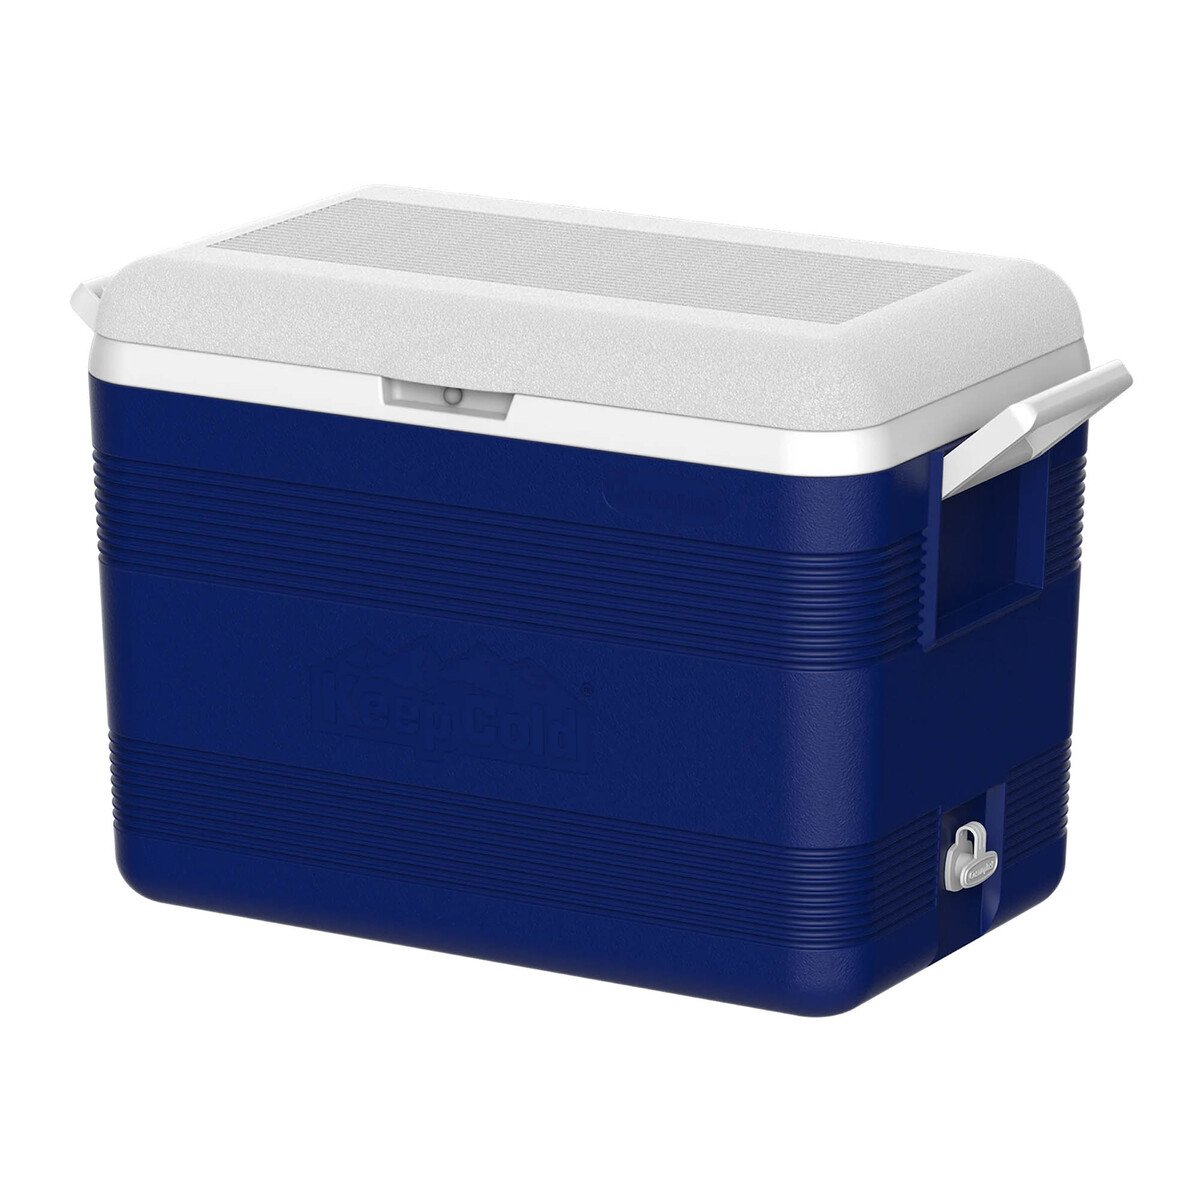 Keep Cold Deluxe Icebox MFIBXX010 40L Assorted Colors